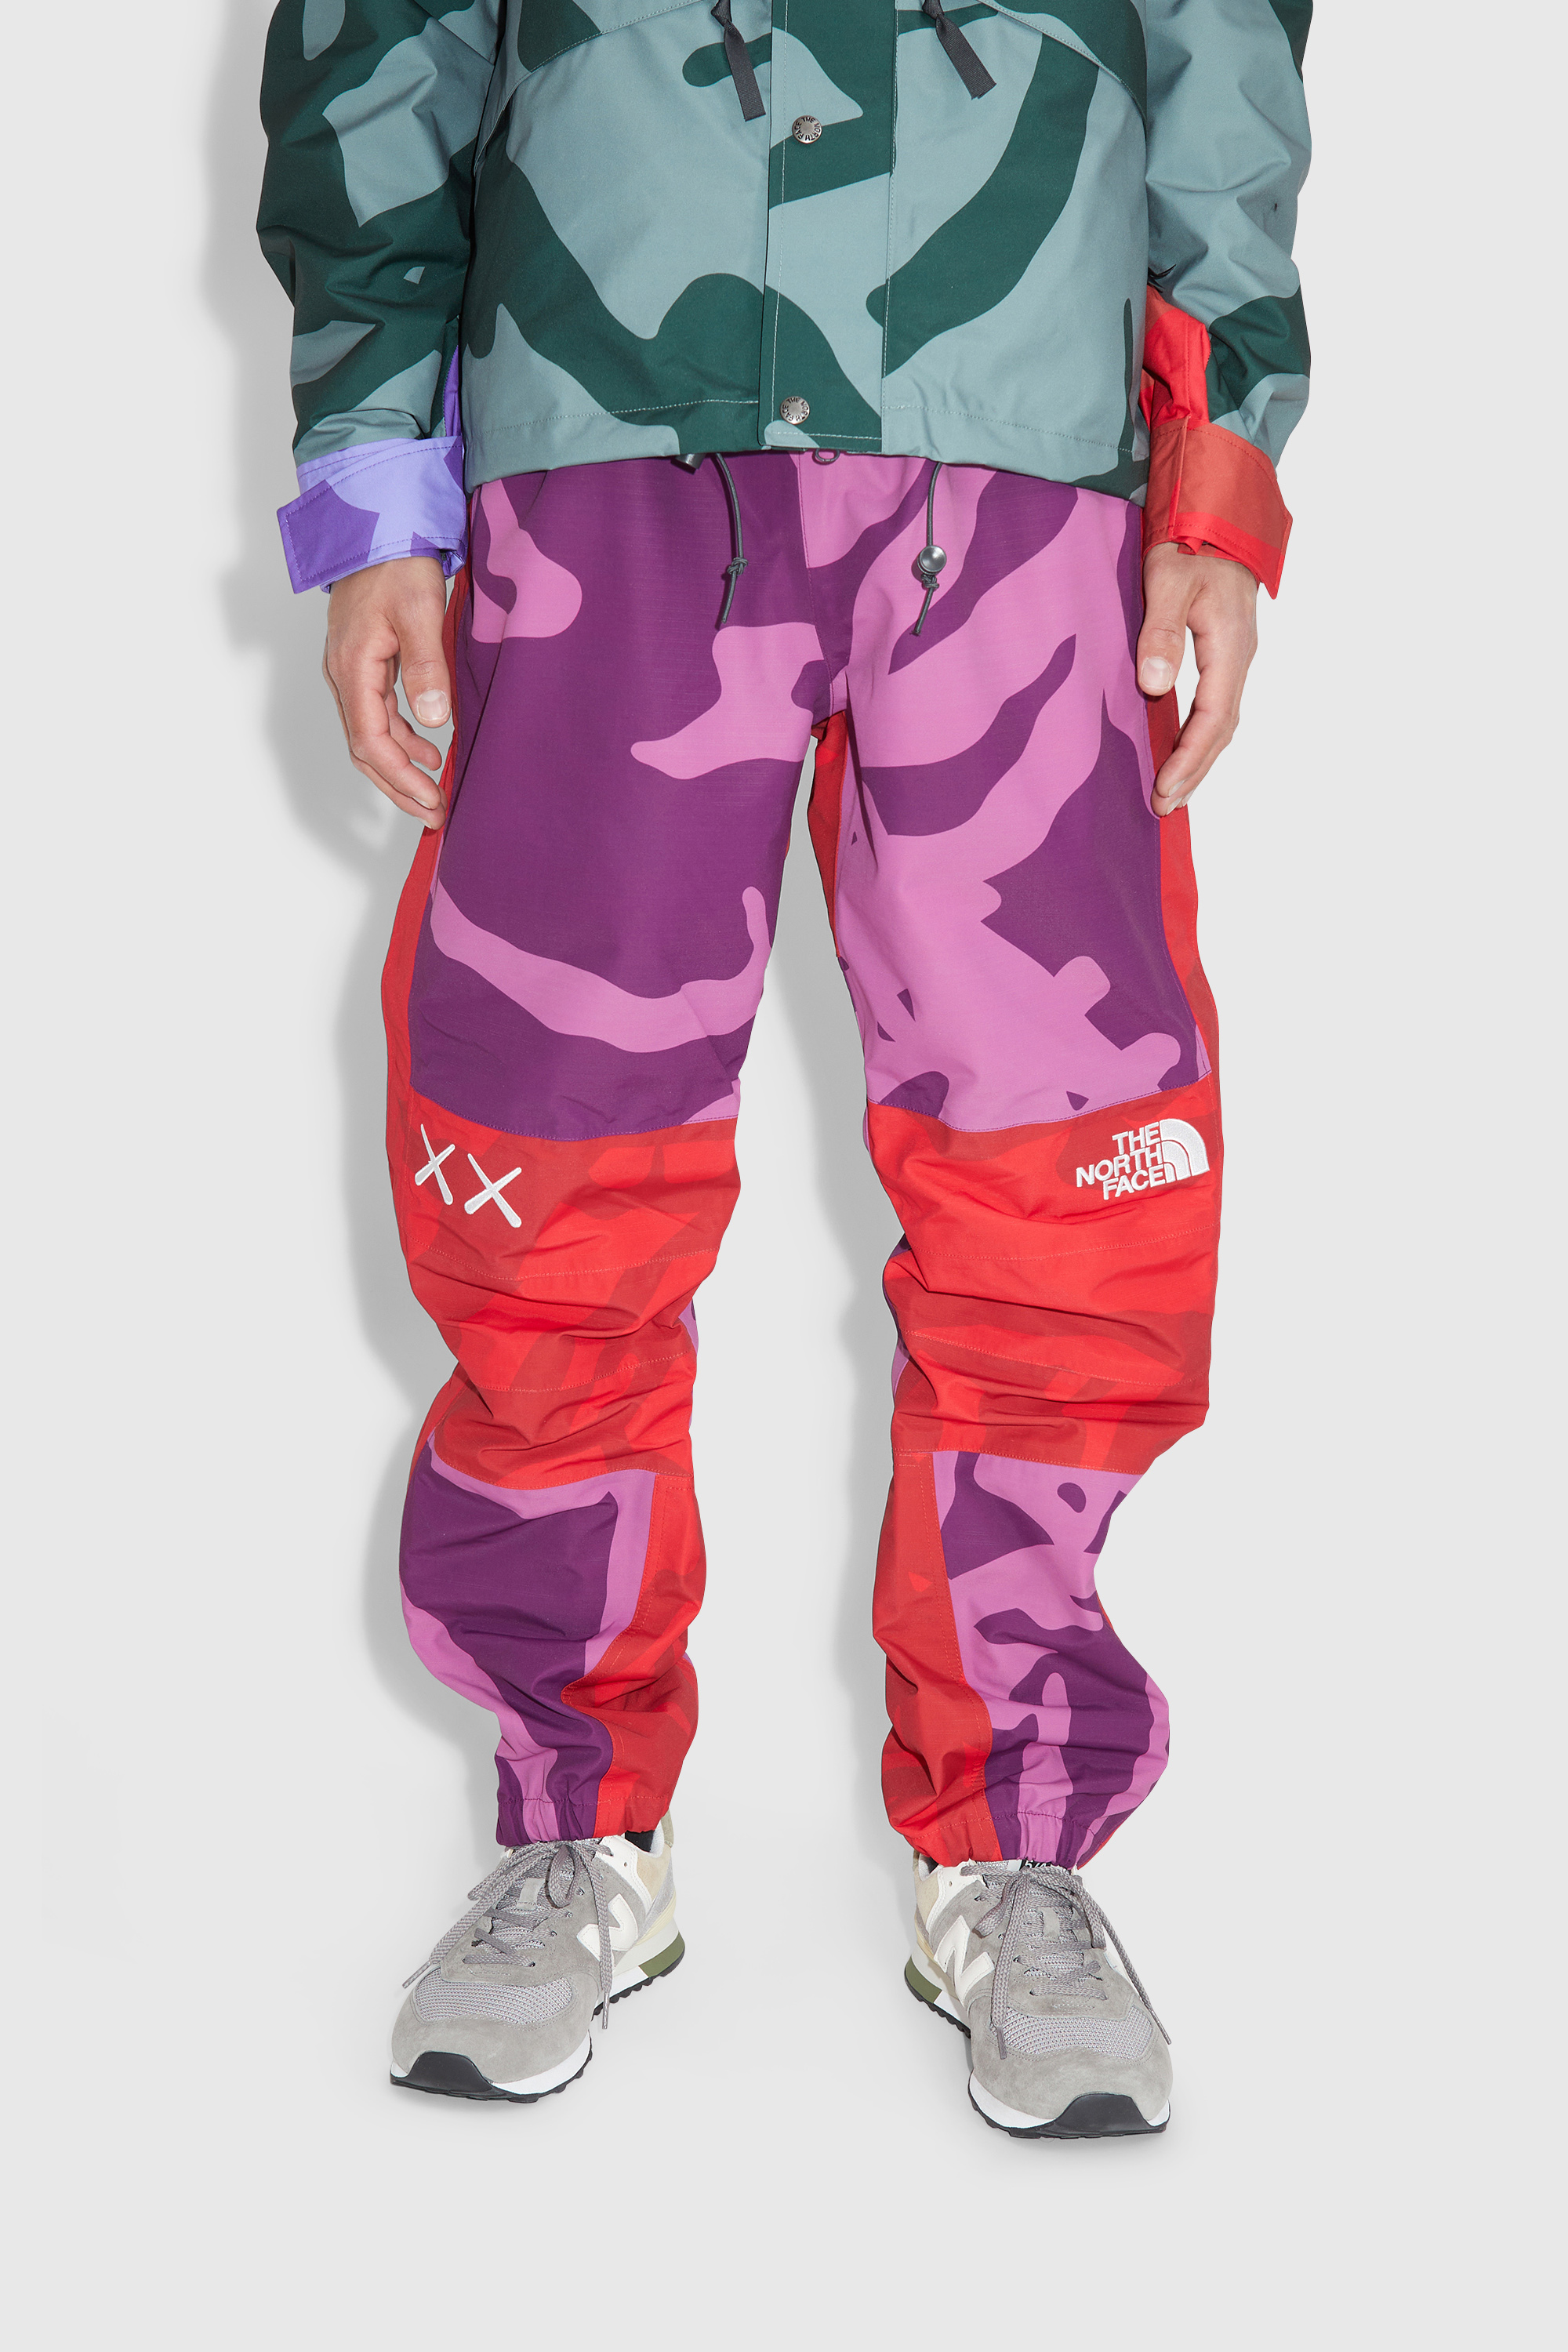 Kaws The North Face Mountain Light Pant - その他